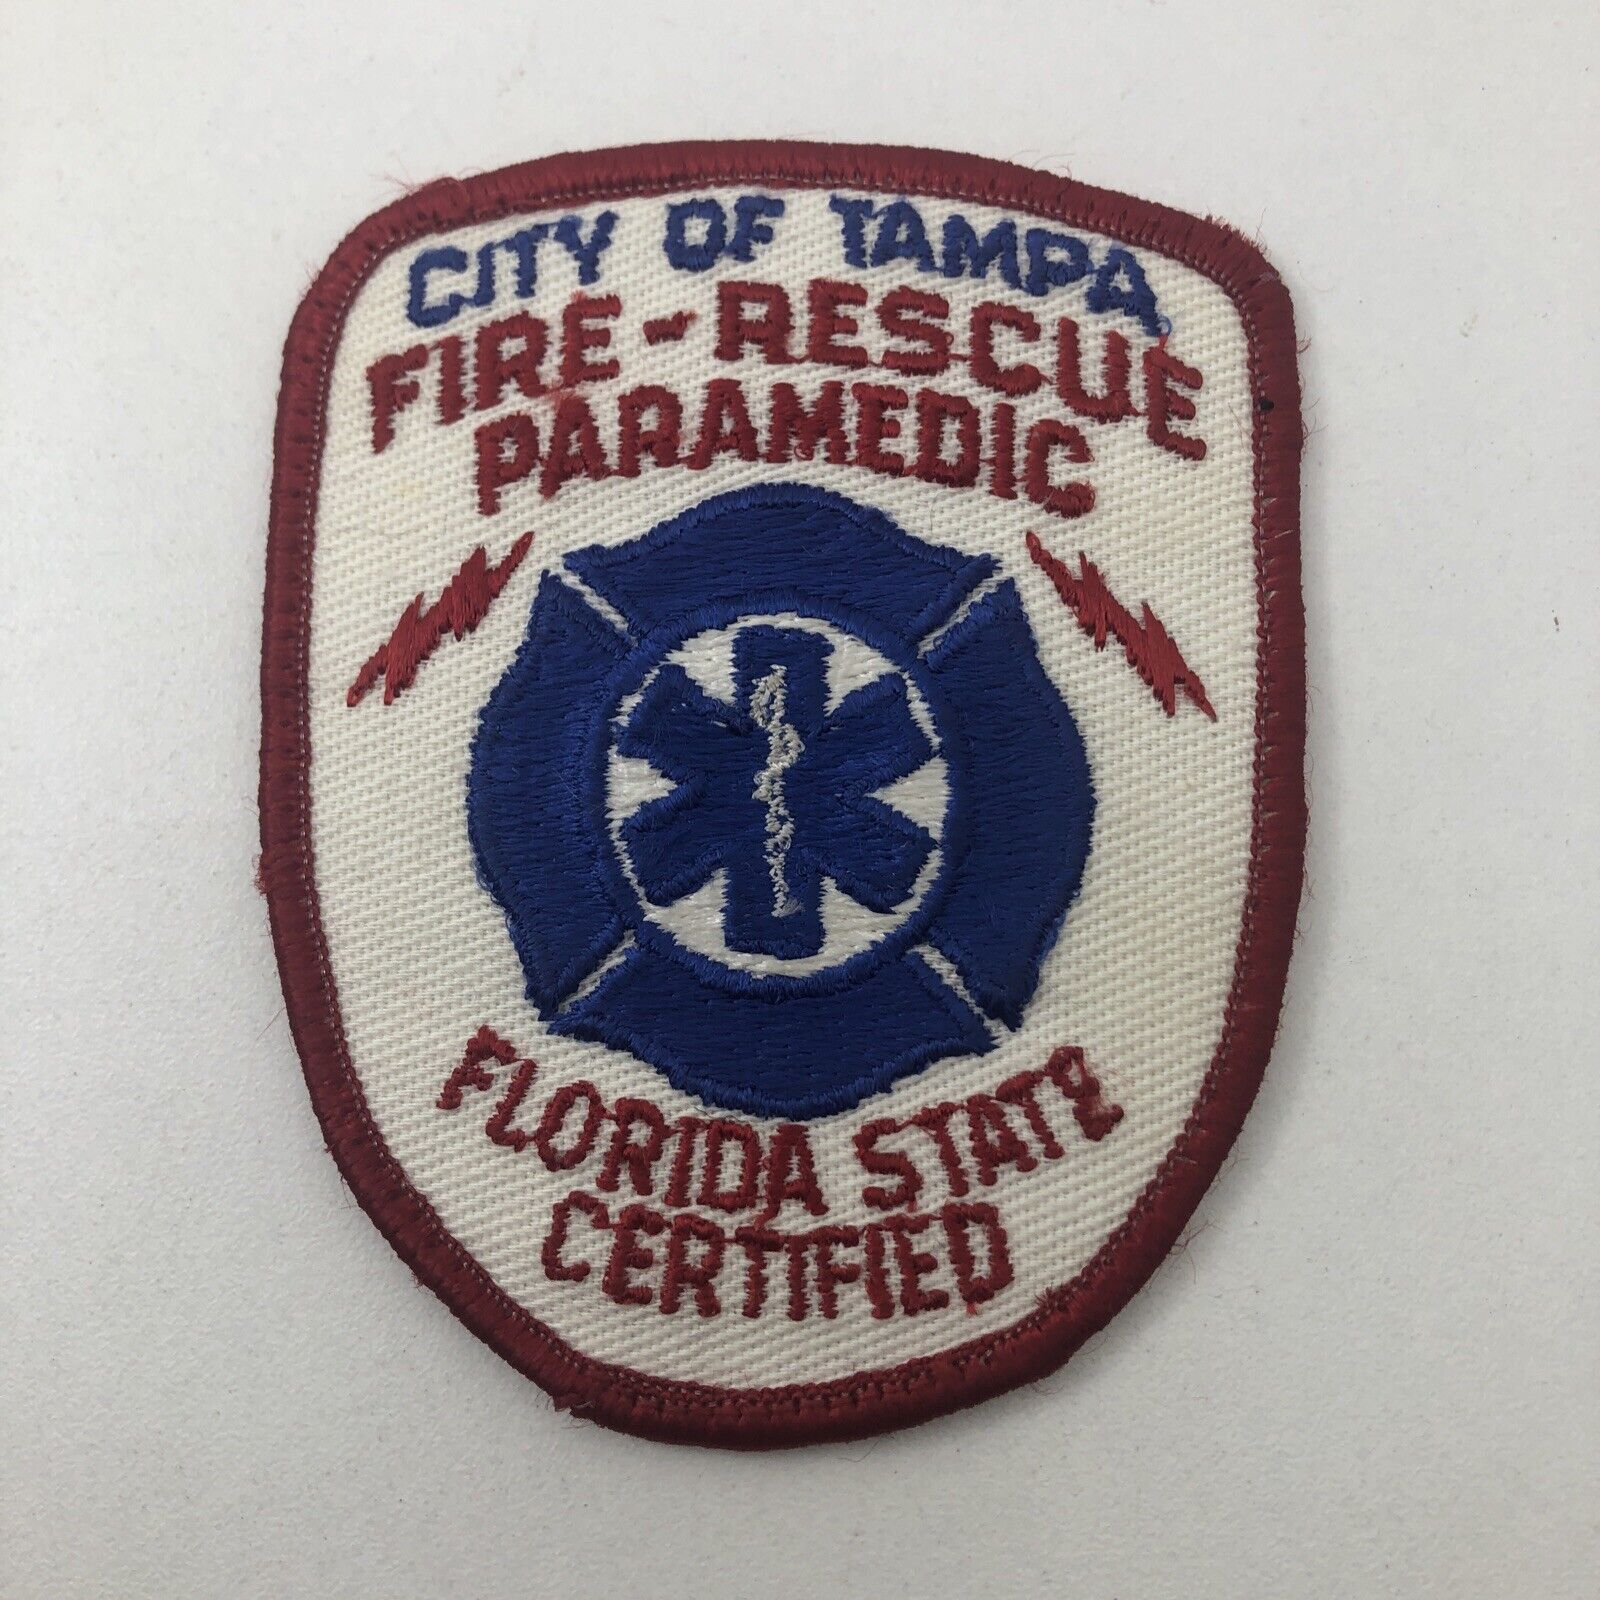 City of Tampa FLORIDA Fire Rescue Paramedic  Florida State Certified patch